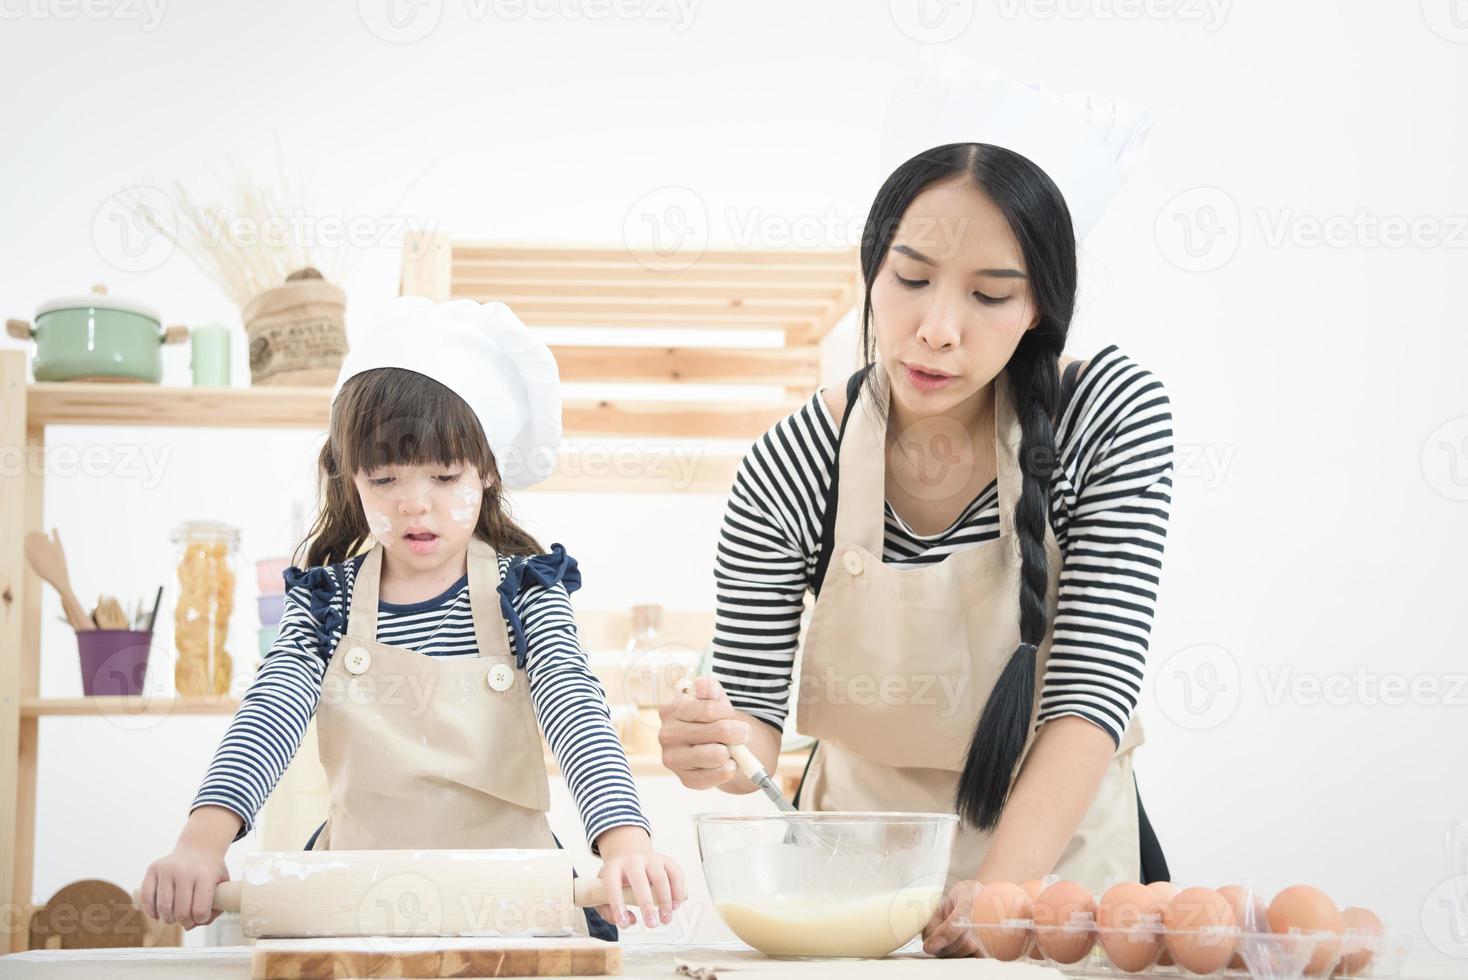 Asian mother and her daughter are preparing the dough to make a cake in the kitchen room on vacation.Photo series of Happy family concept. photo